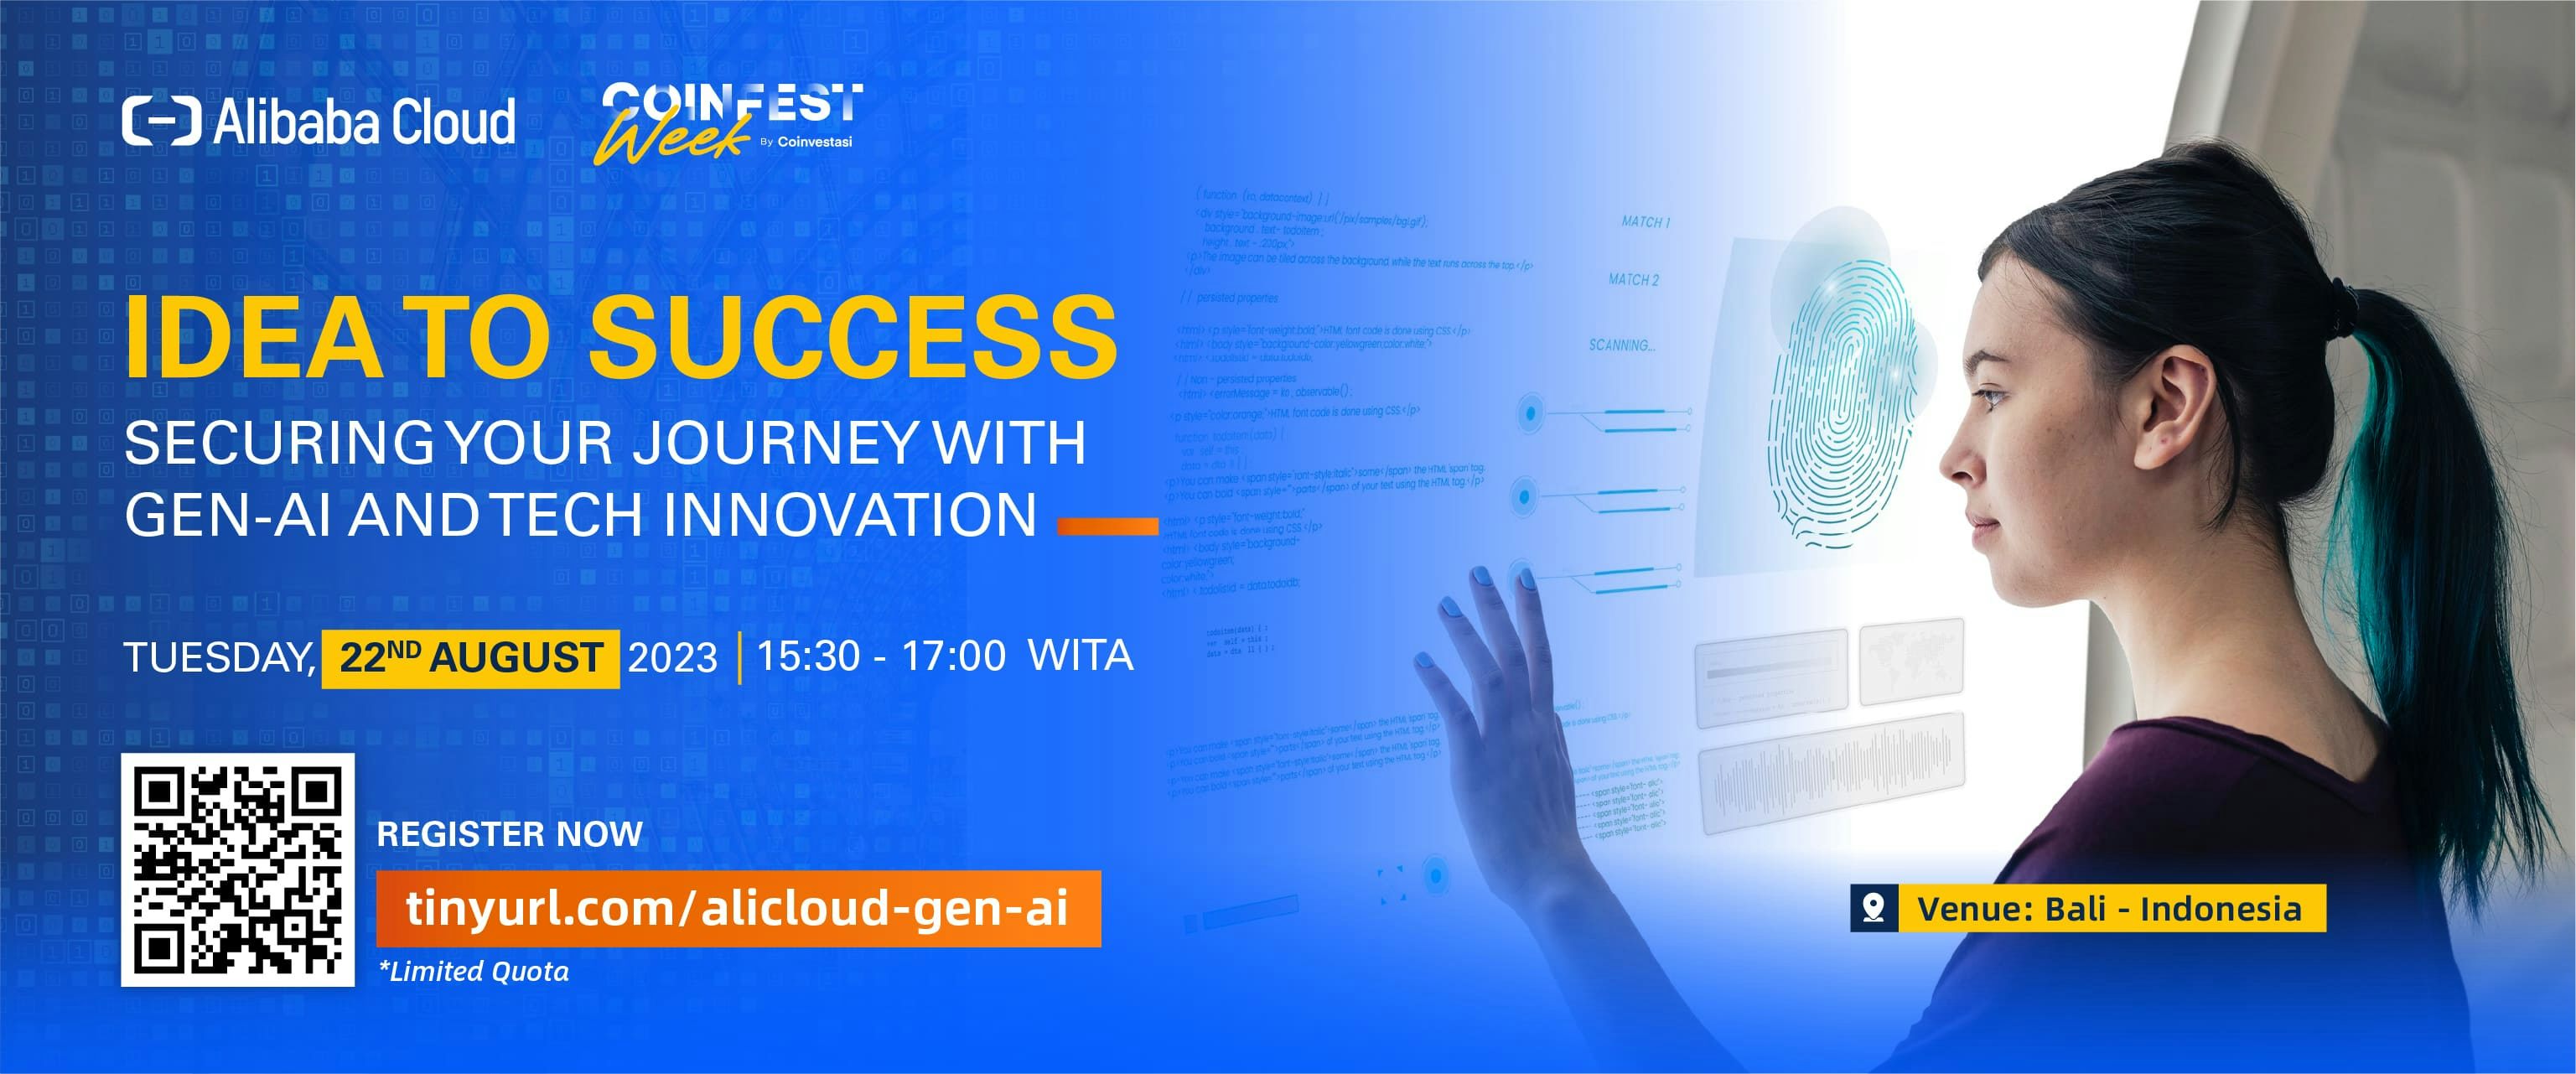 Idea To Success: Securing Your Journey With Gen-AI & Tech Innovation